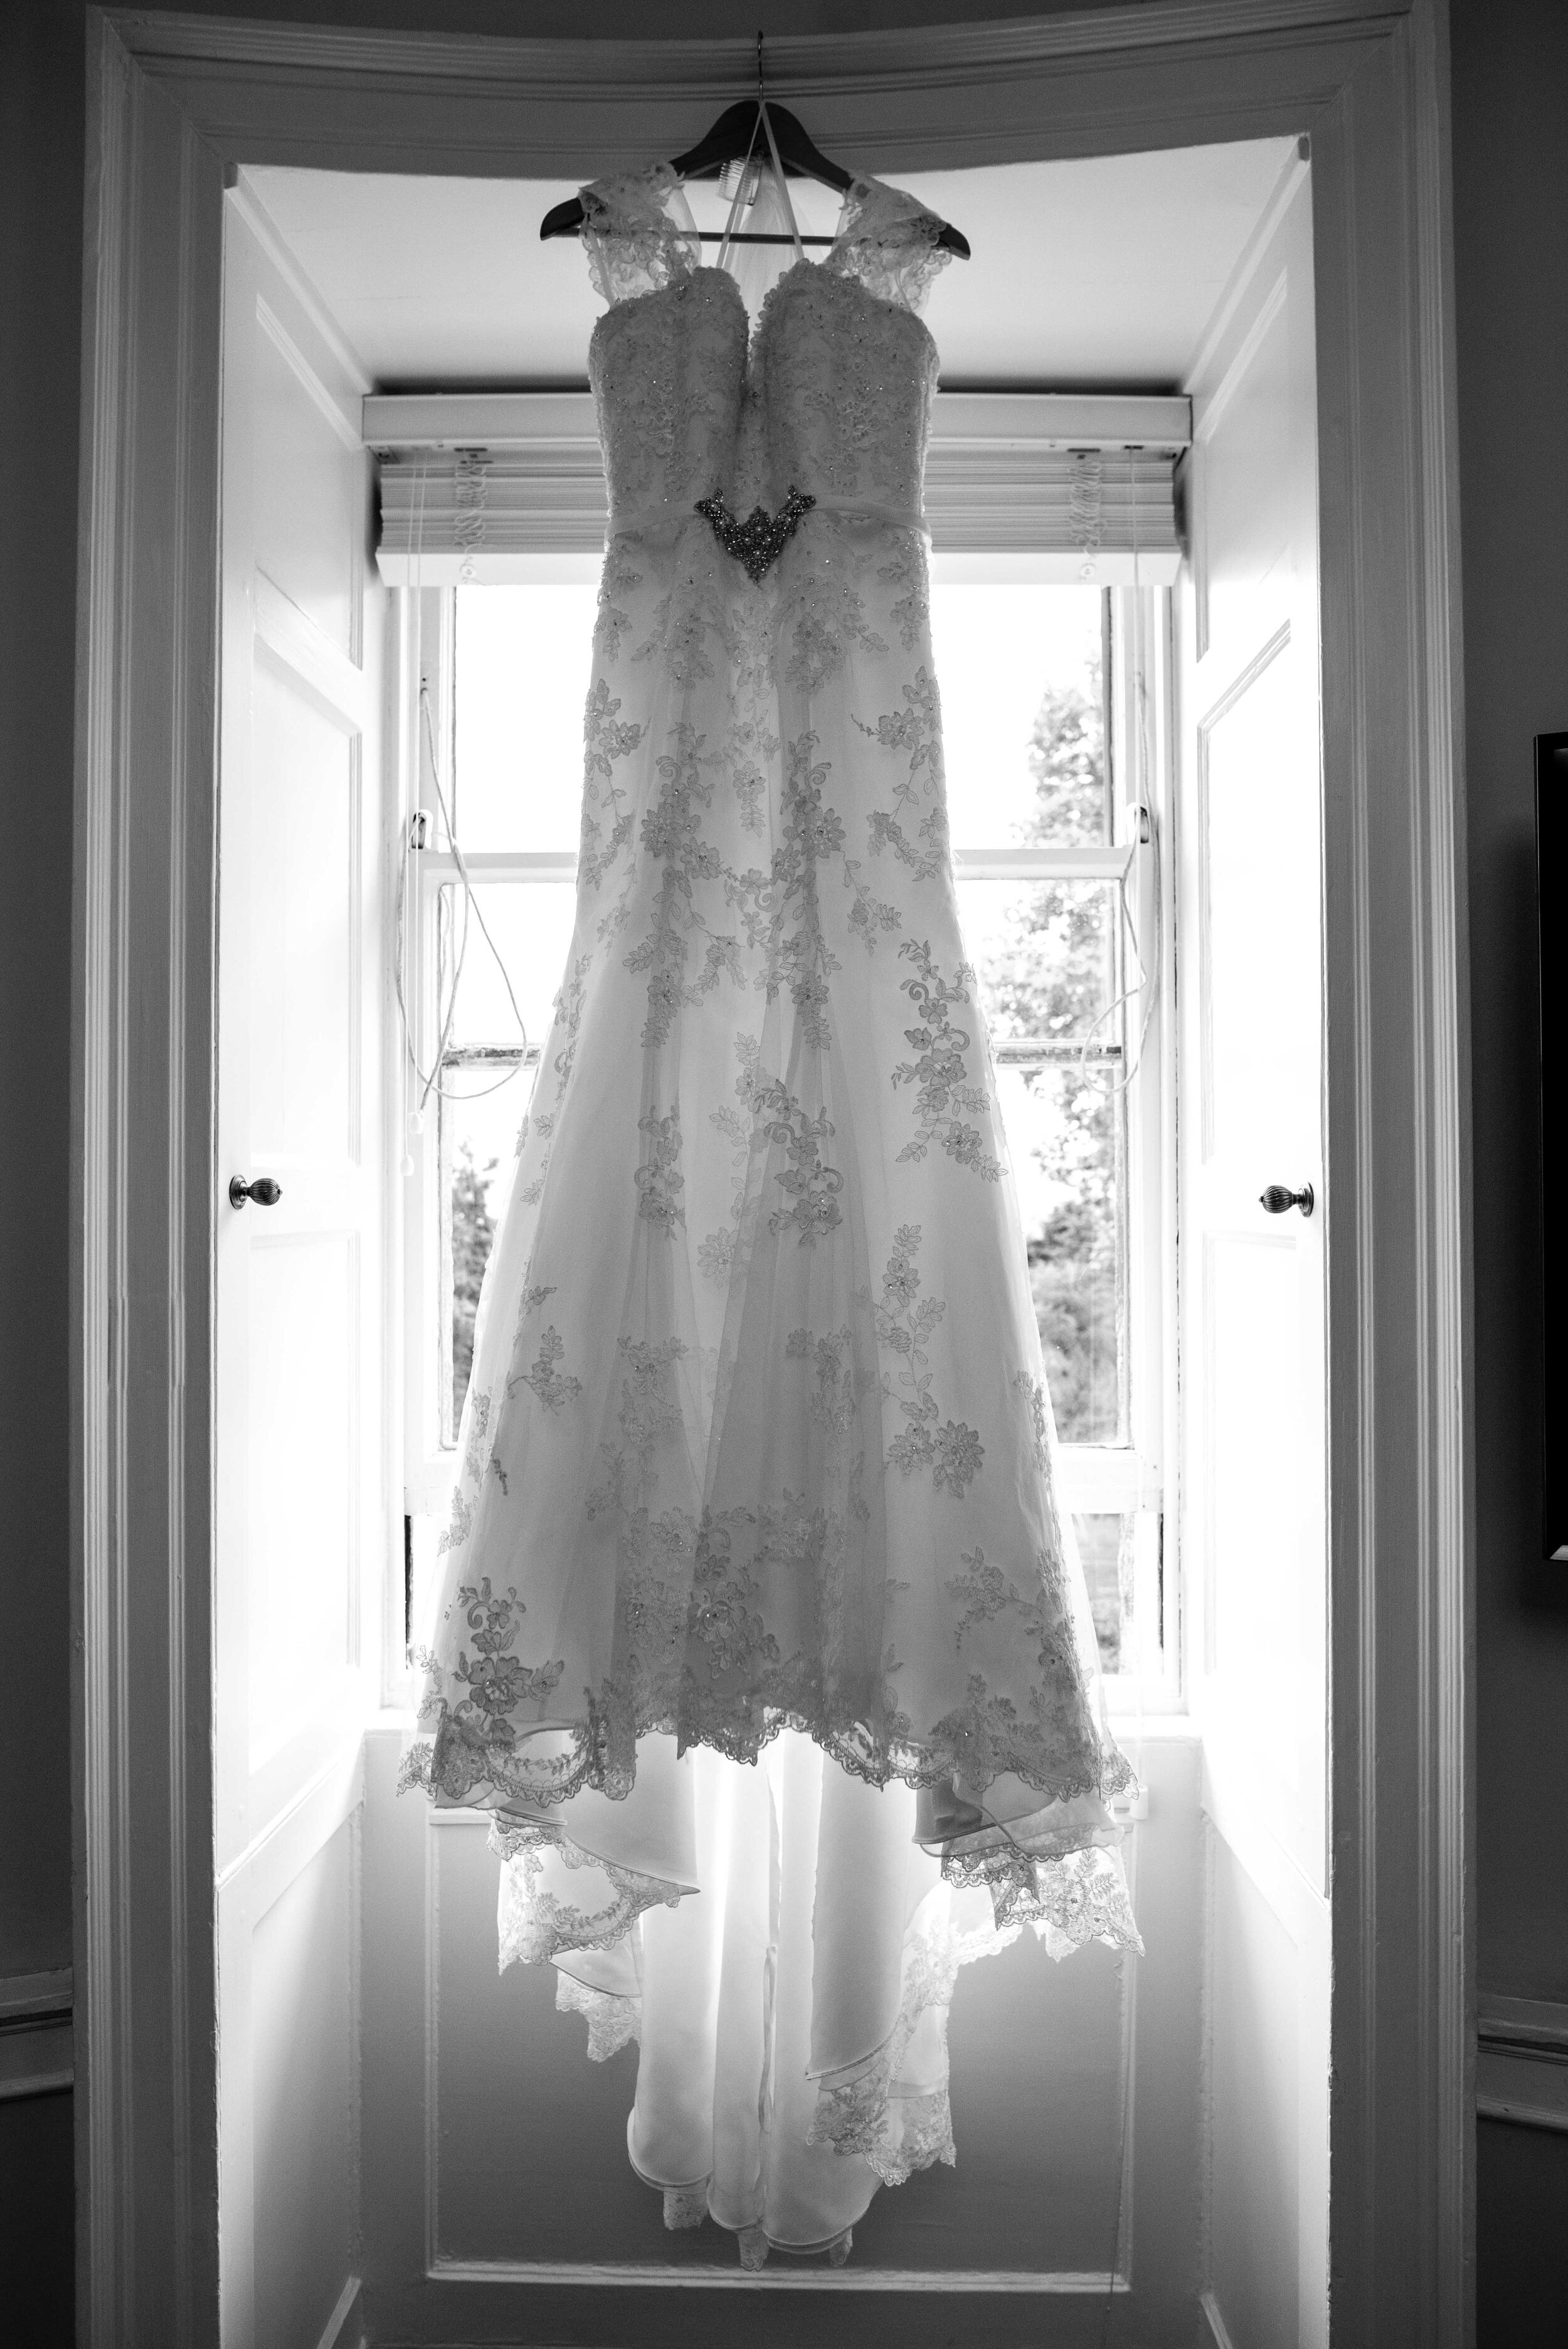 Brides dress hanging in the window